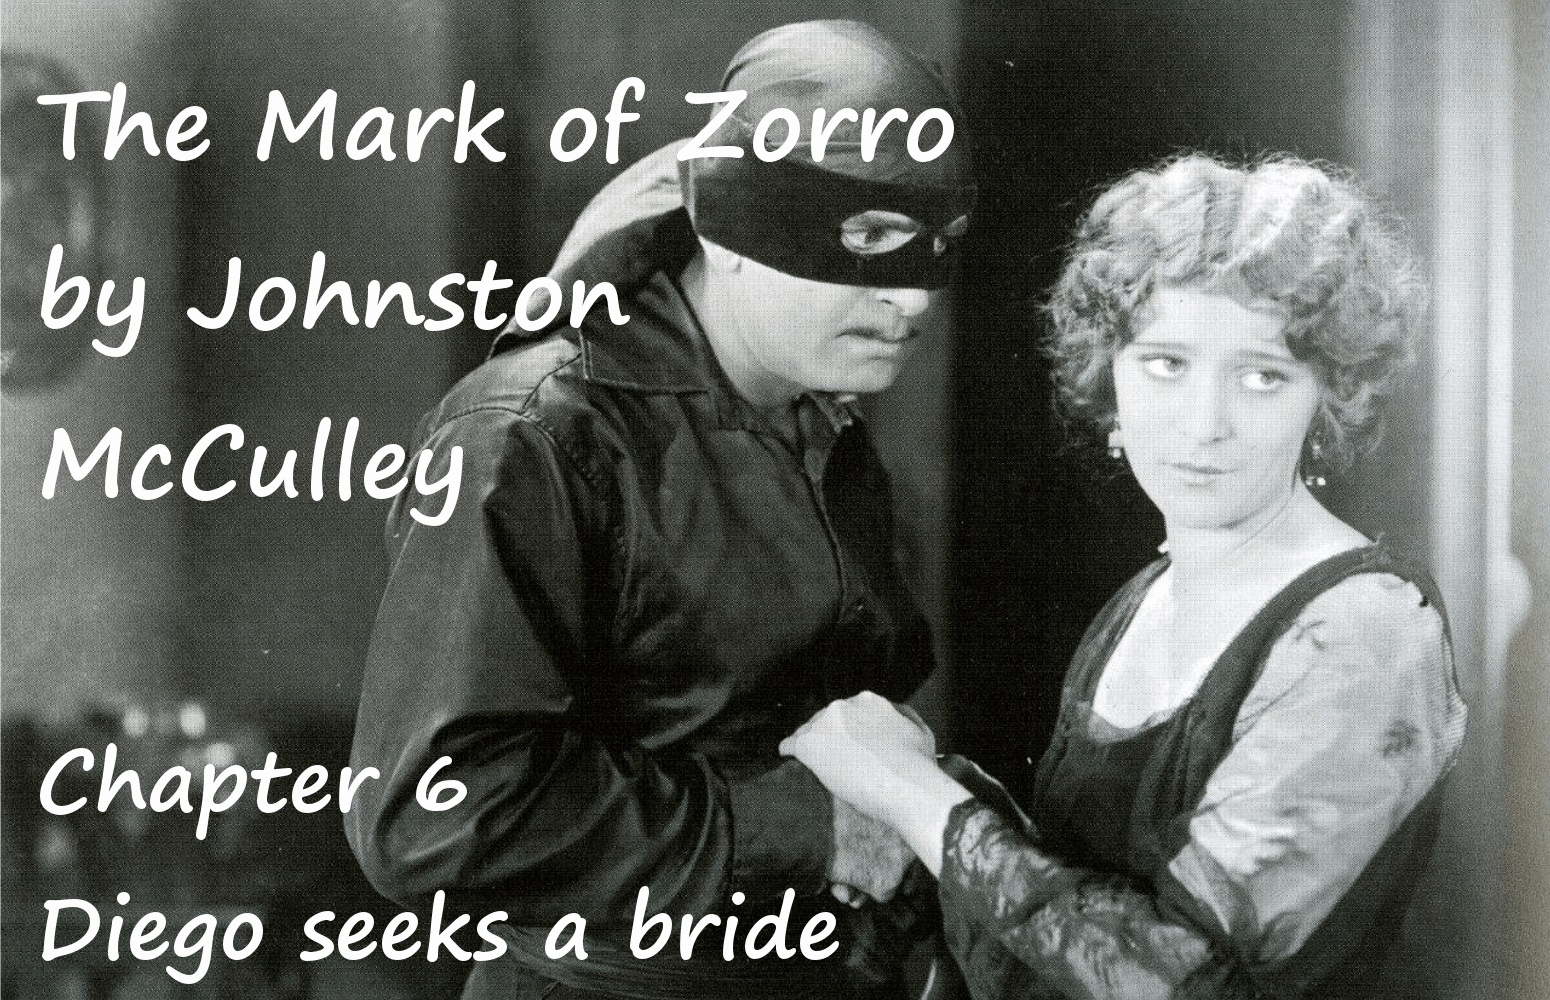 The Mark of Zorro chapter 6 Diego seeks a bride by Johnston McCulley